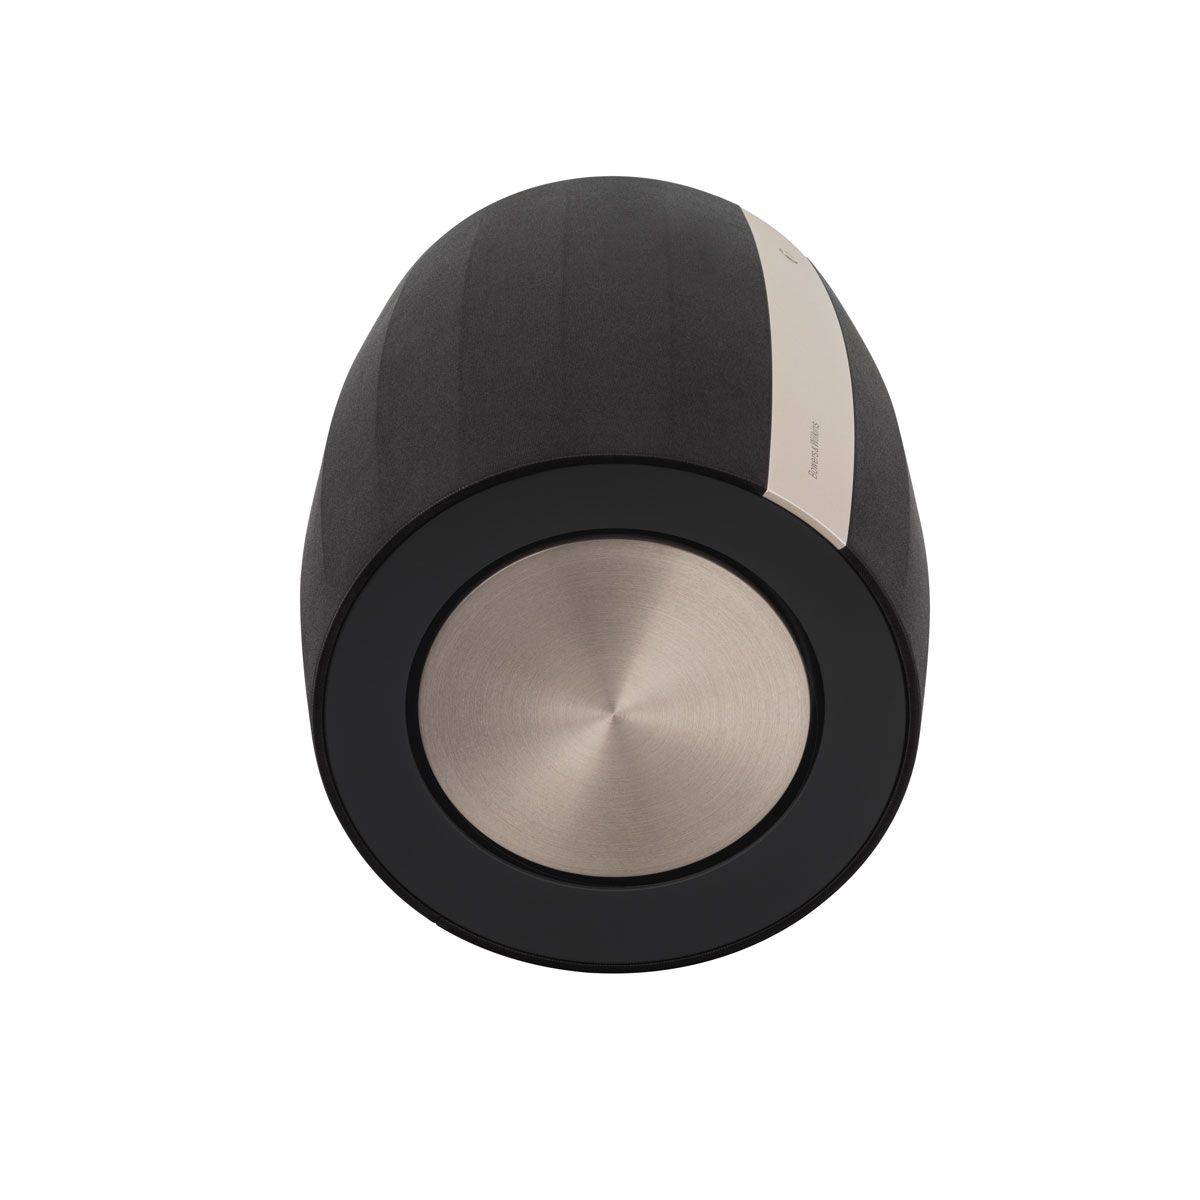 Bowers & Wilkins - Bass Subwoofer